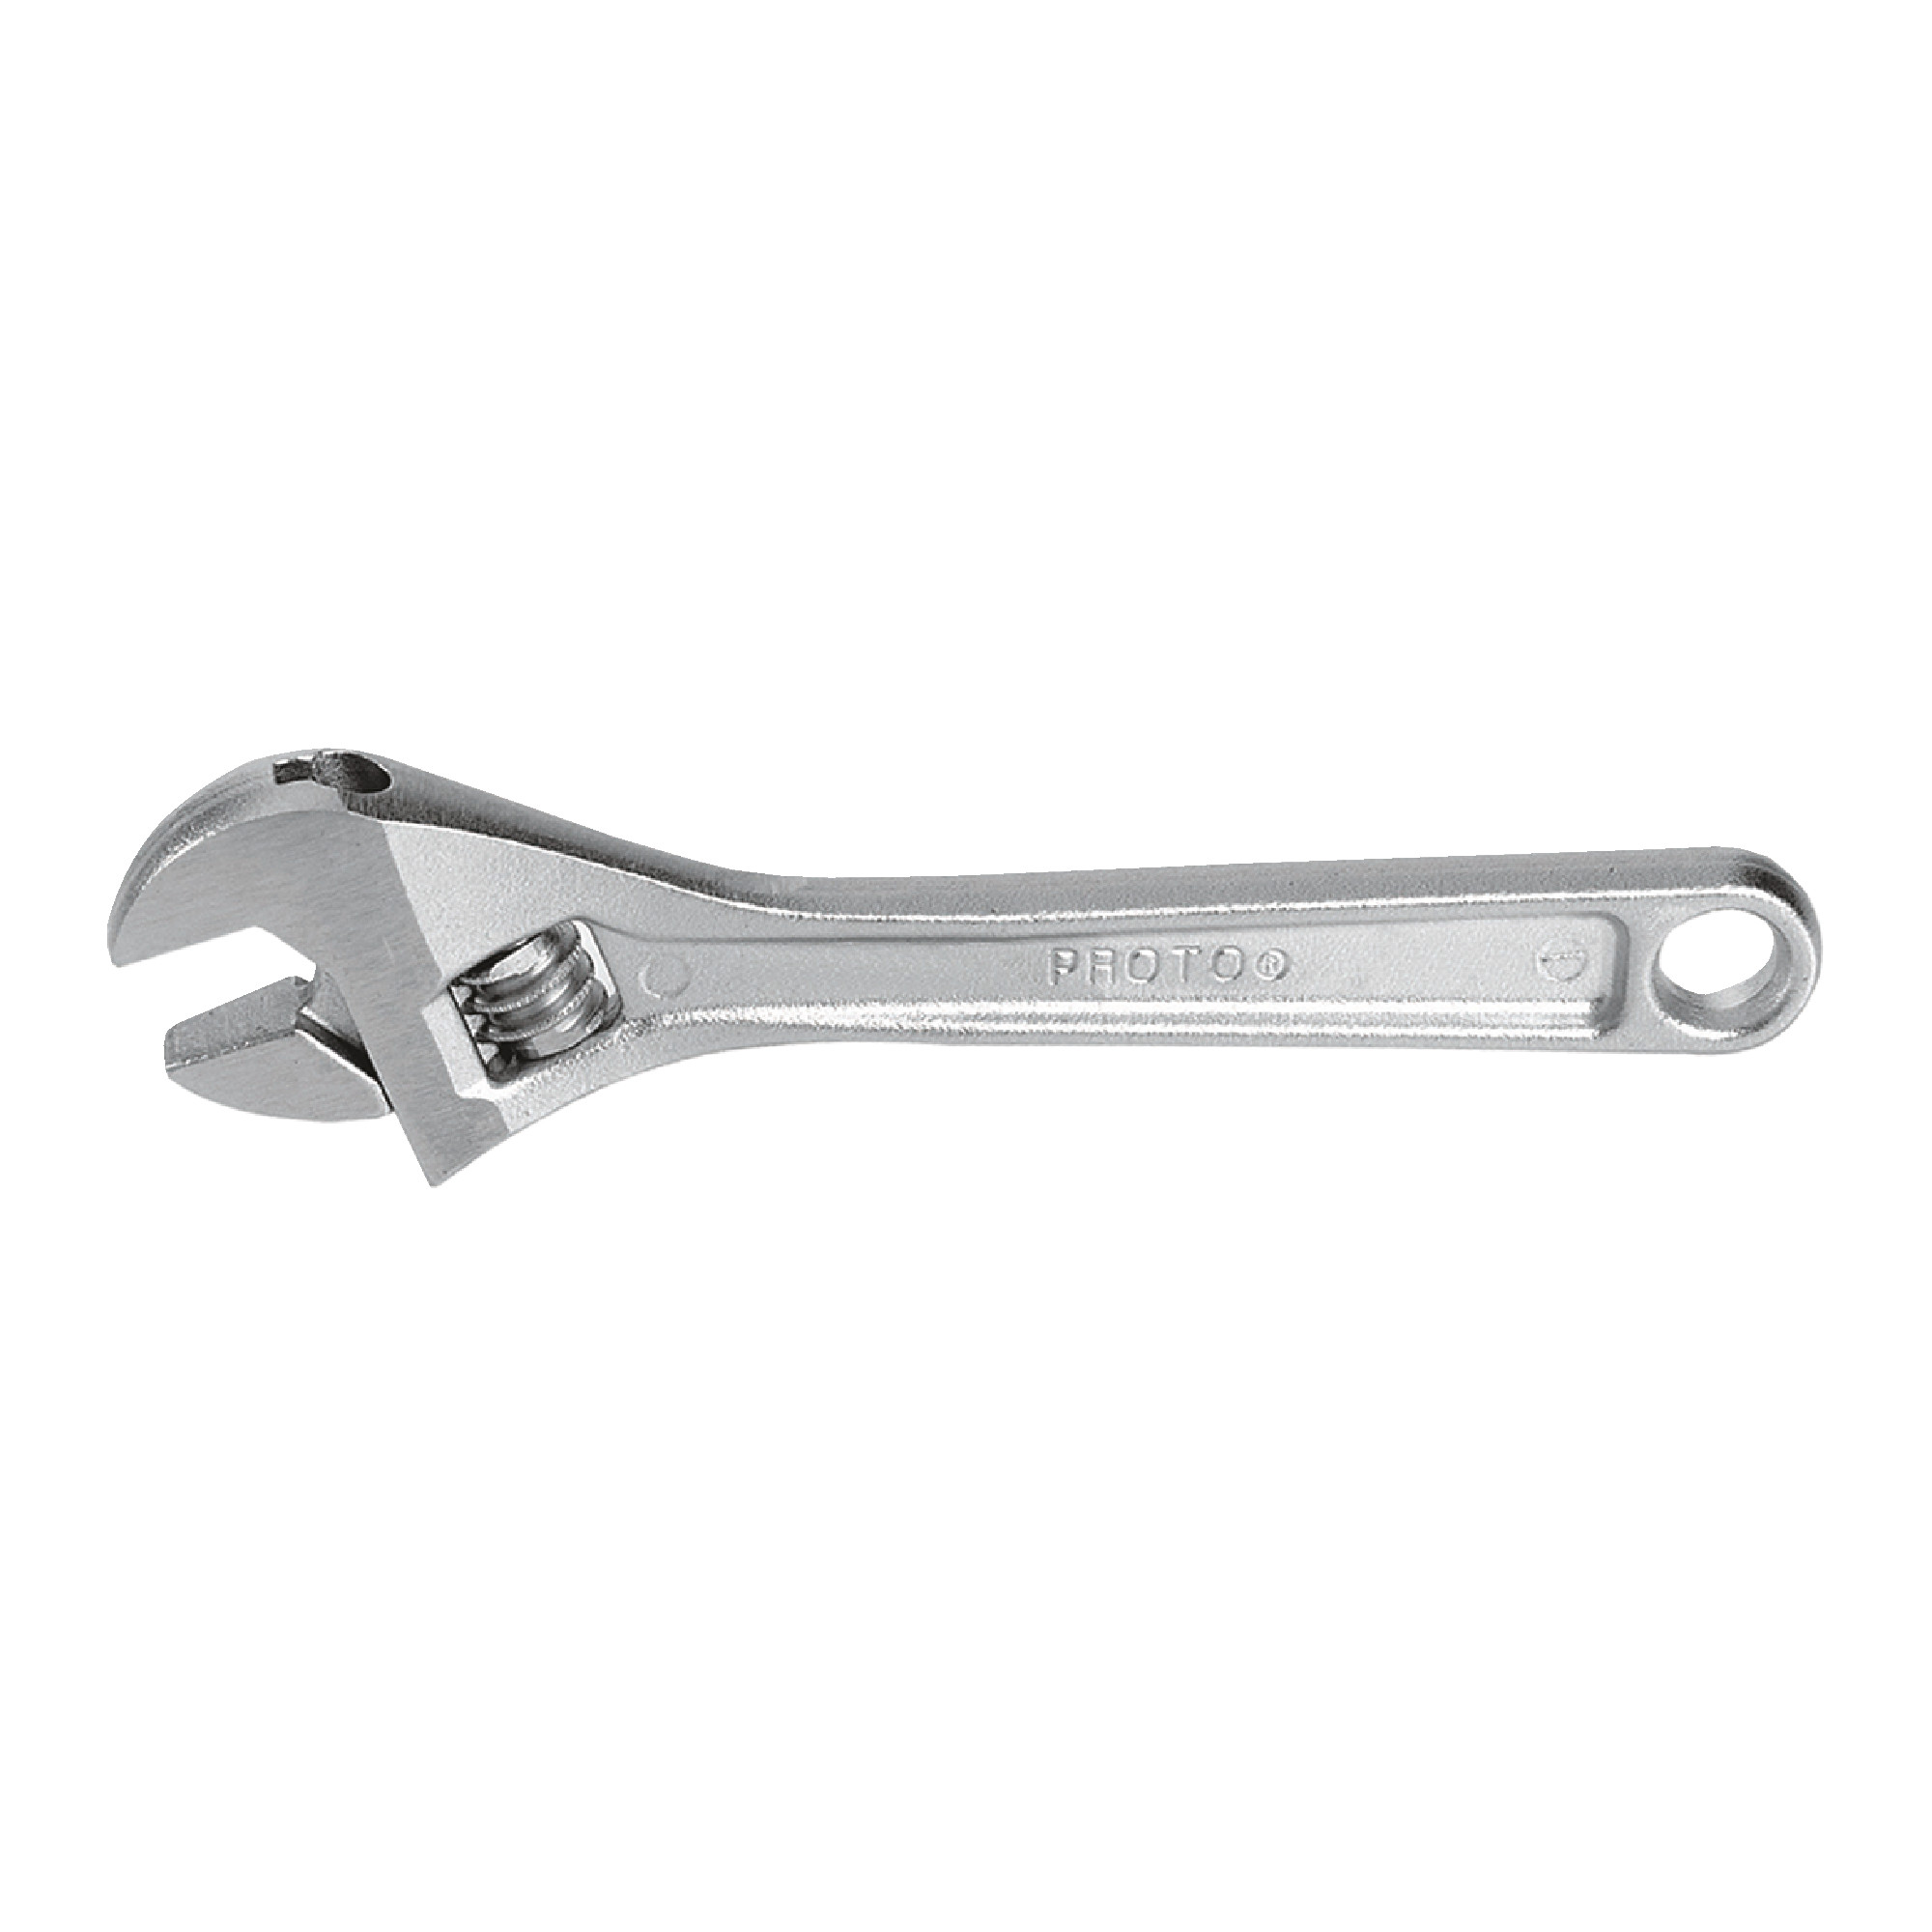 J704 1/2" Adjustable Wrench With Satin Chrome Finish